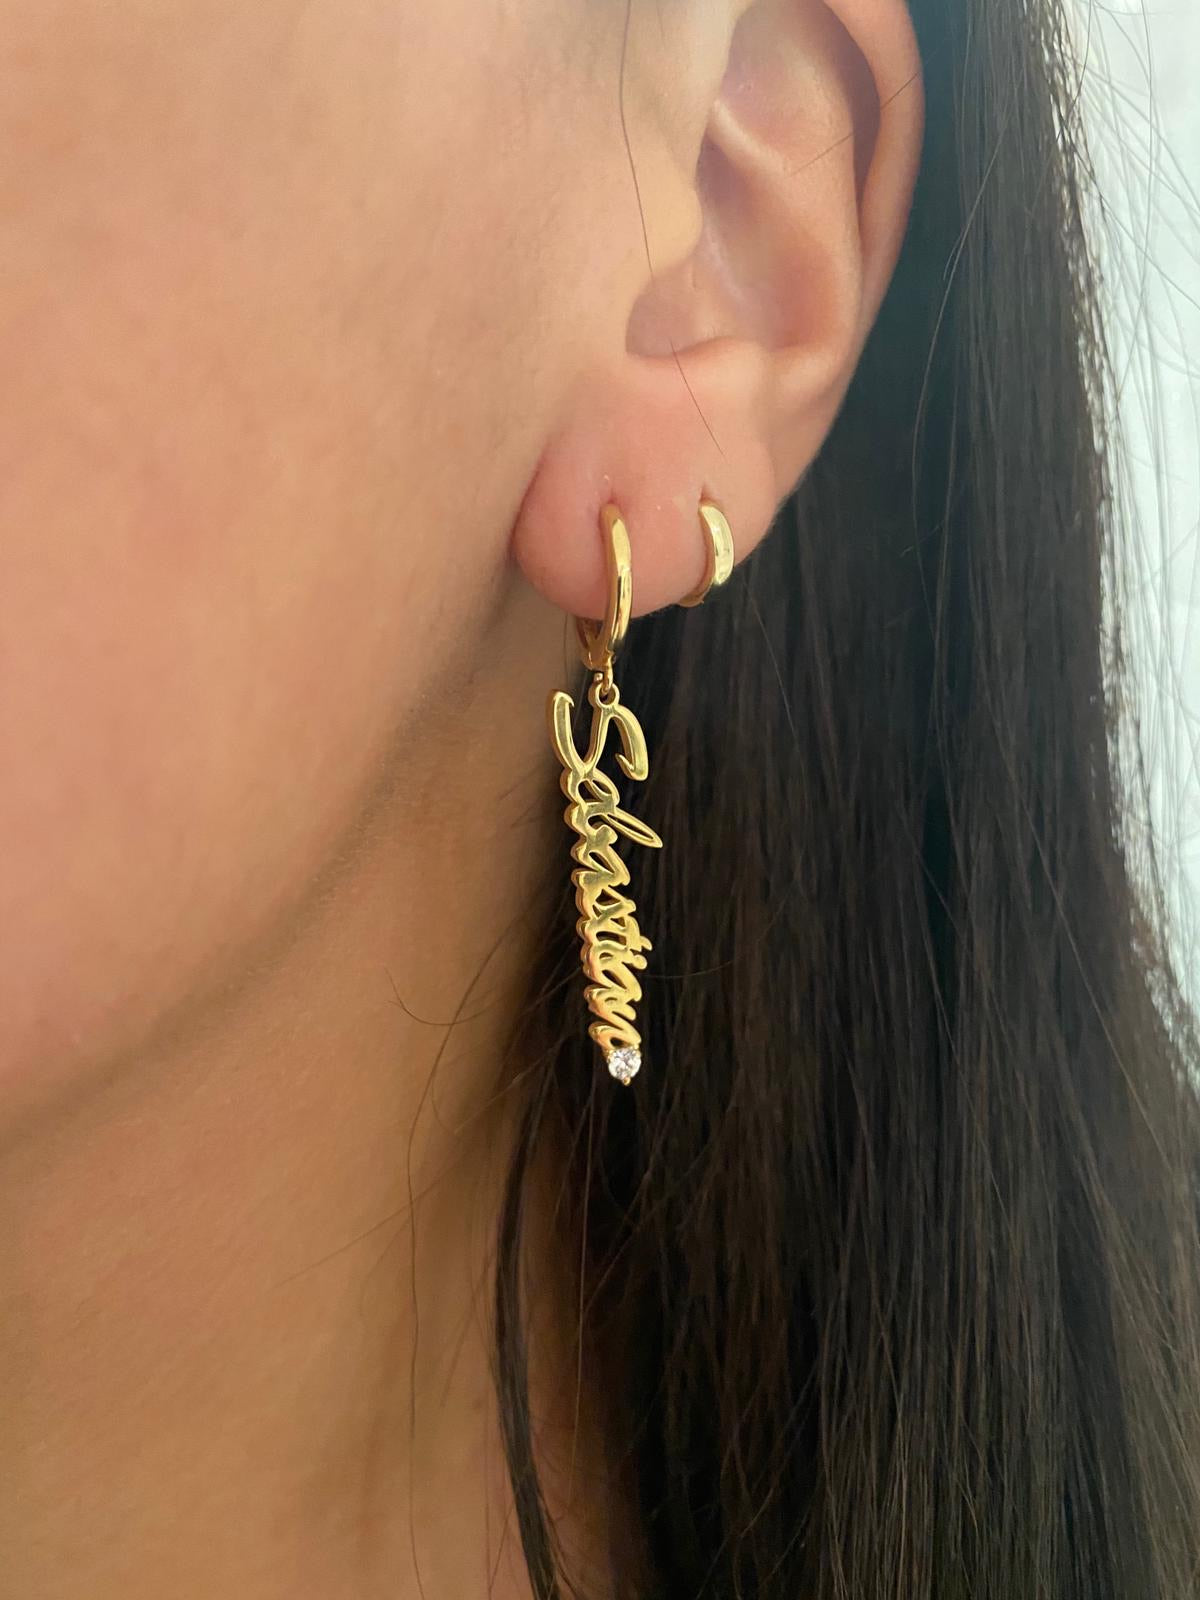 Script Hanging Name Earrings - Retail Therapy Jewelry